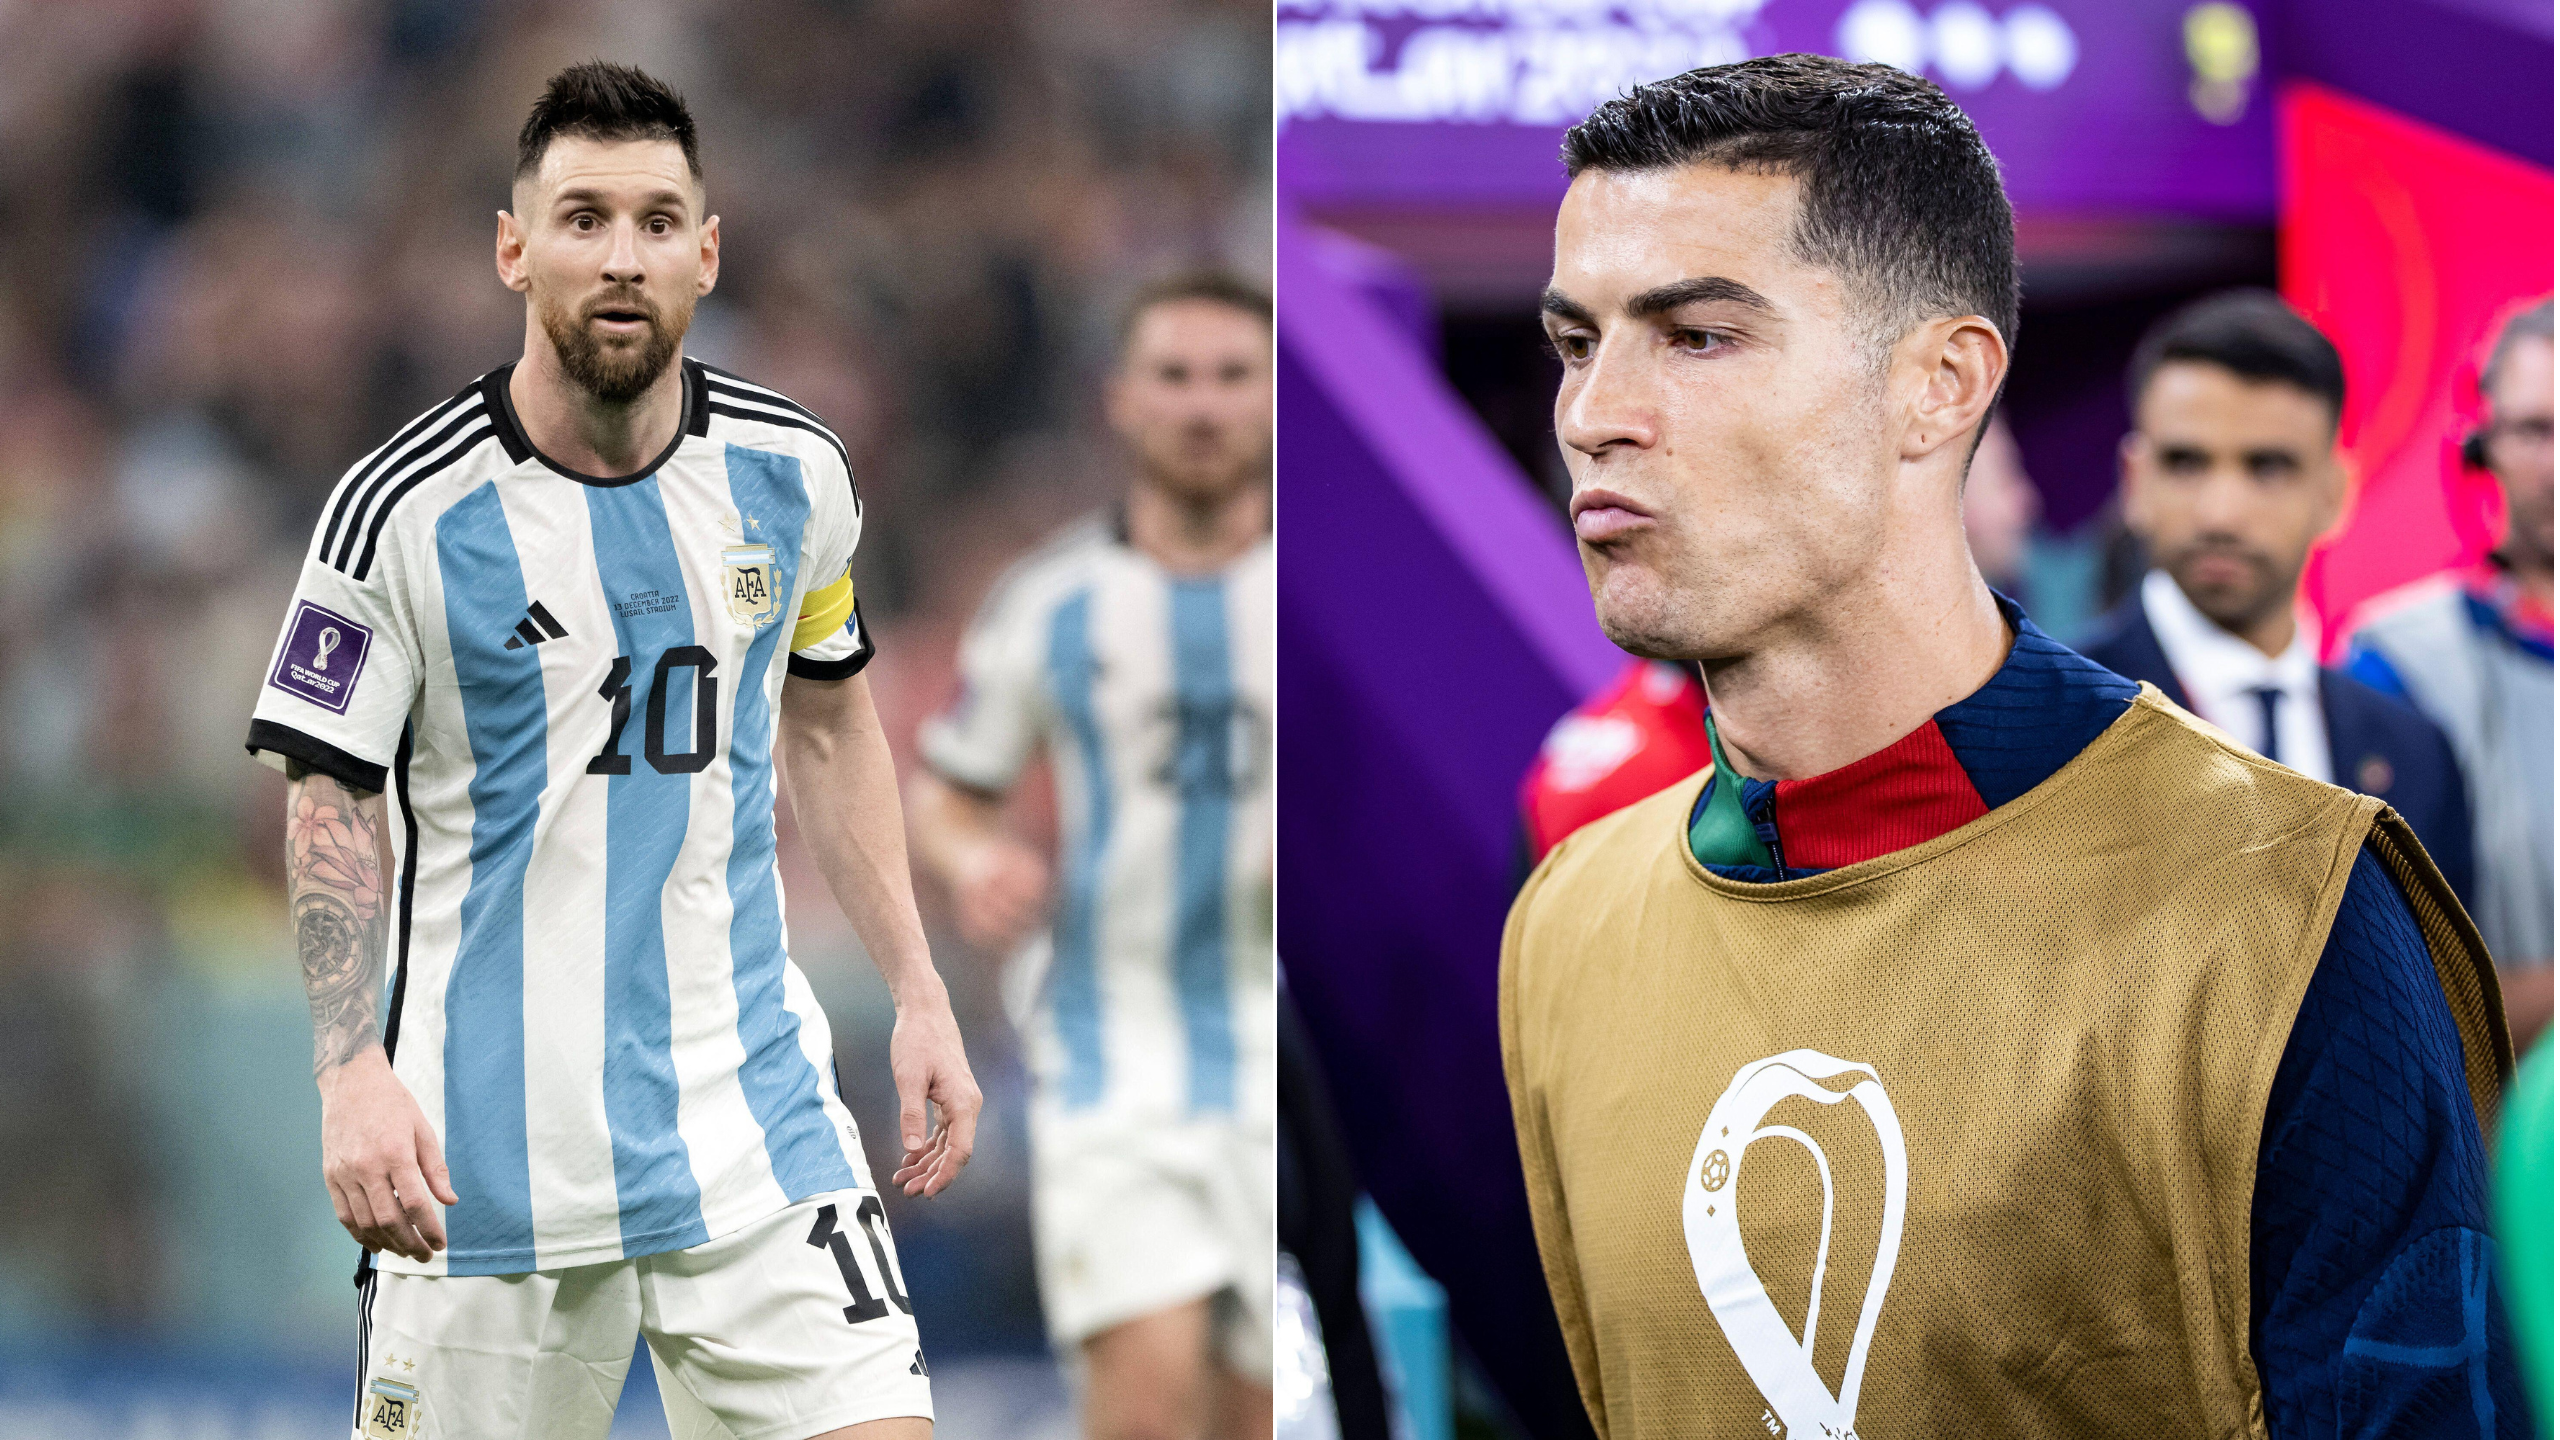 Lionel Messi is the greatest player Cristiano Ronaldo has watched